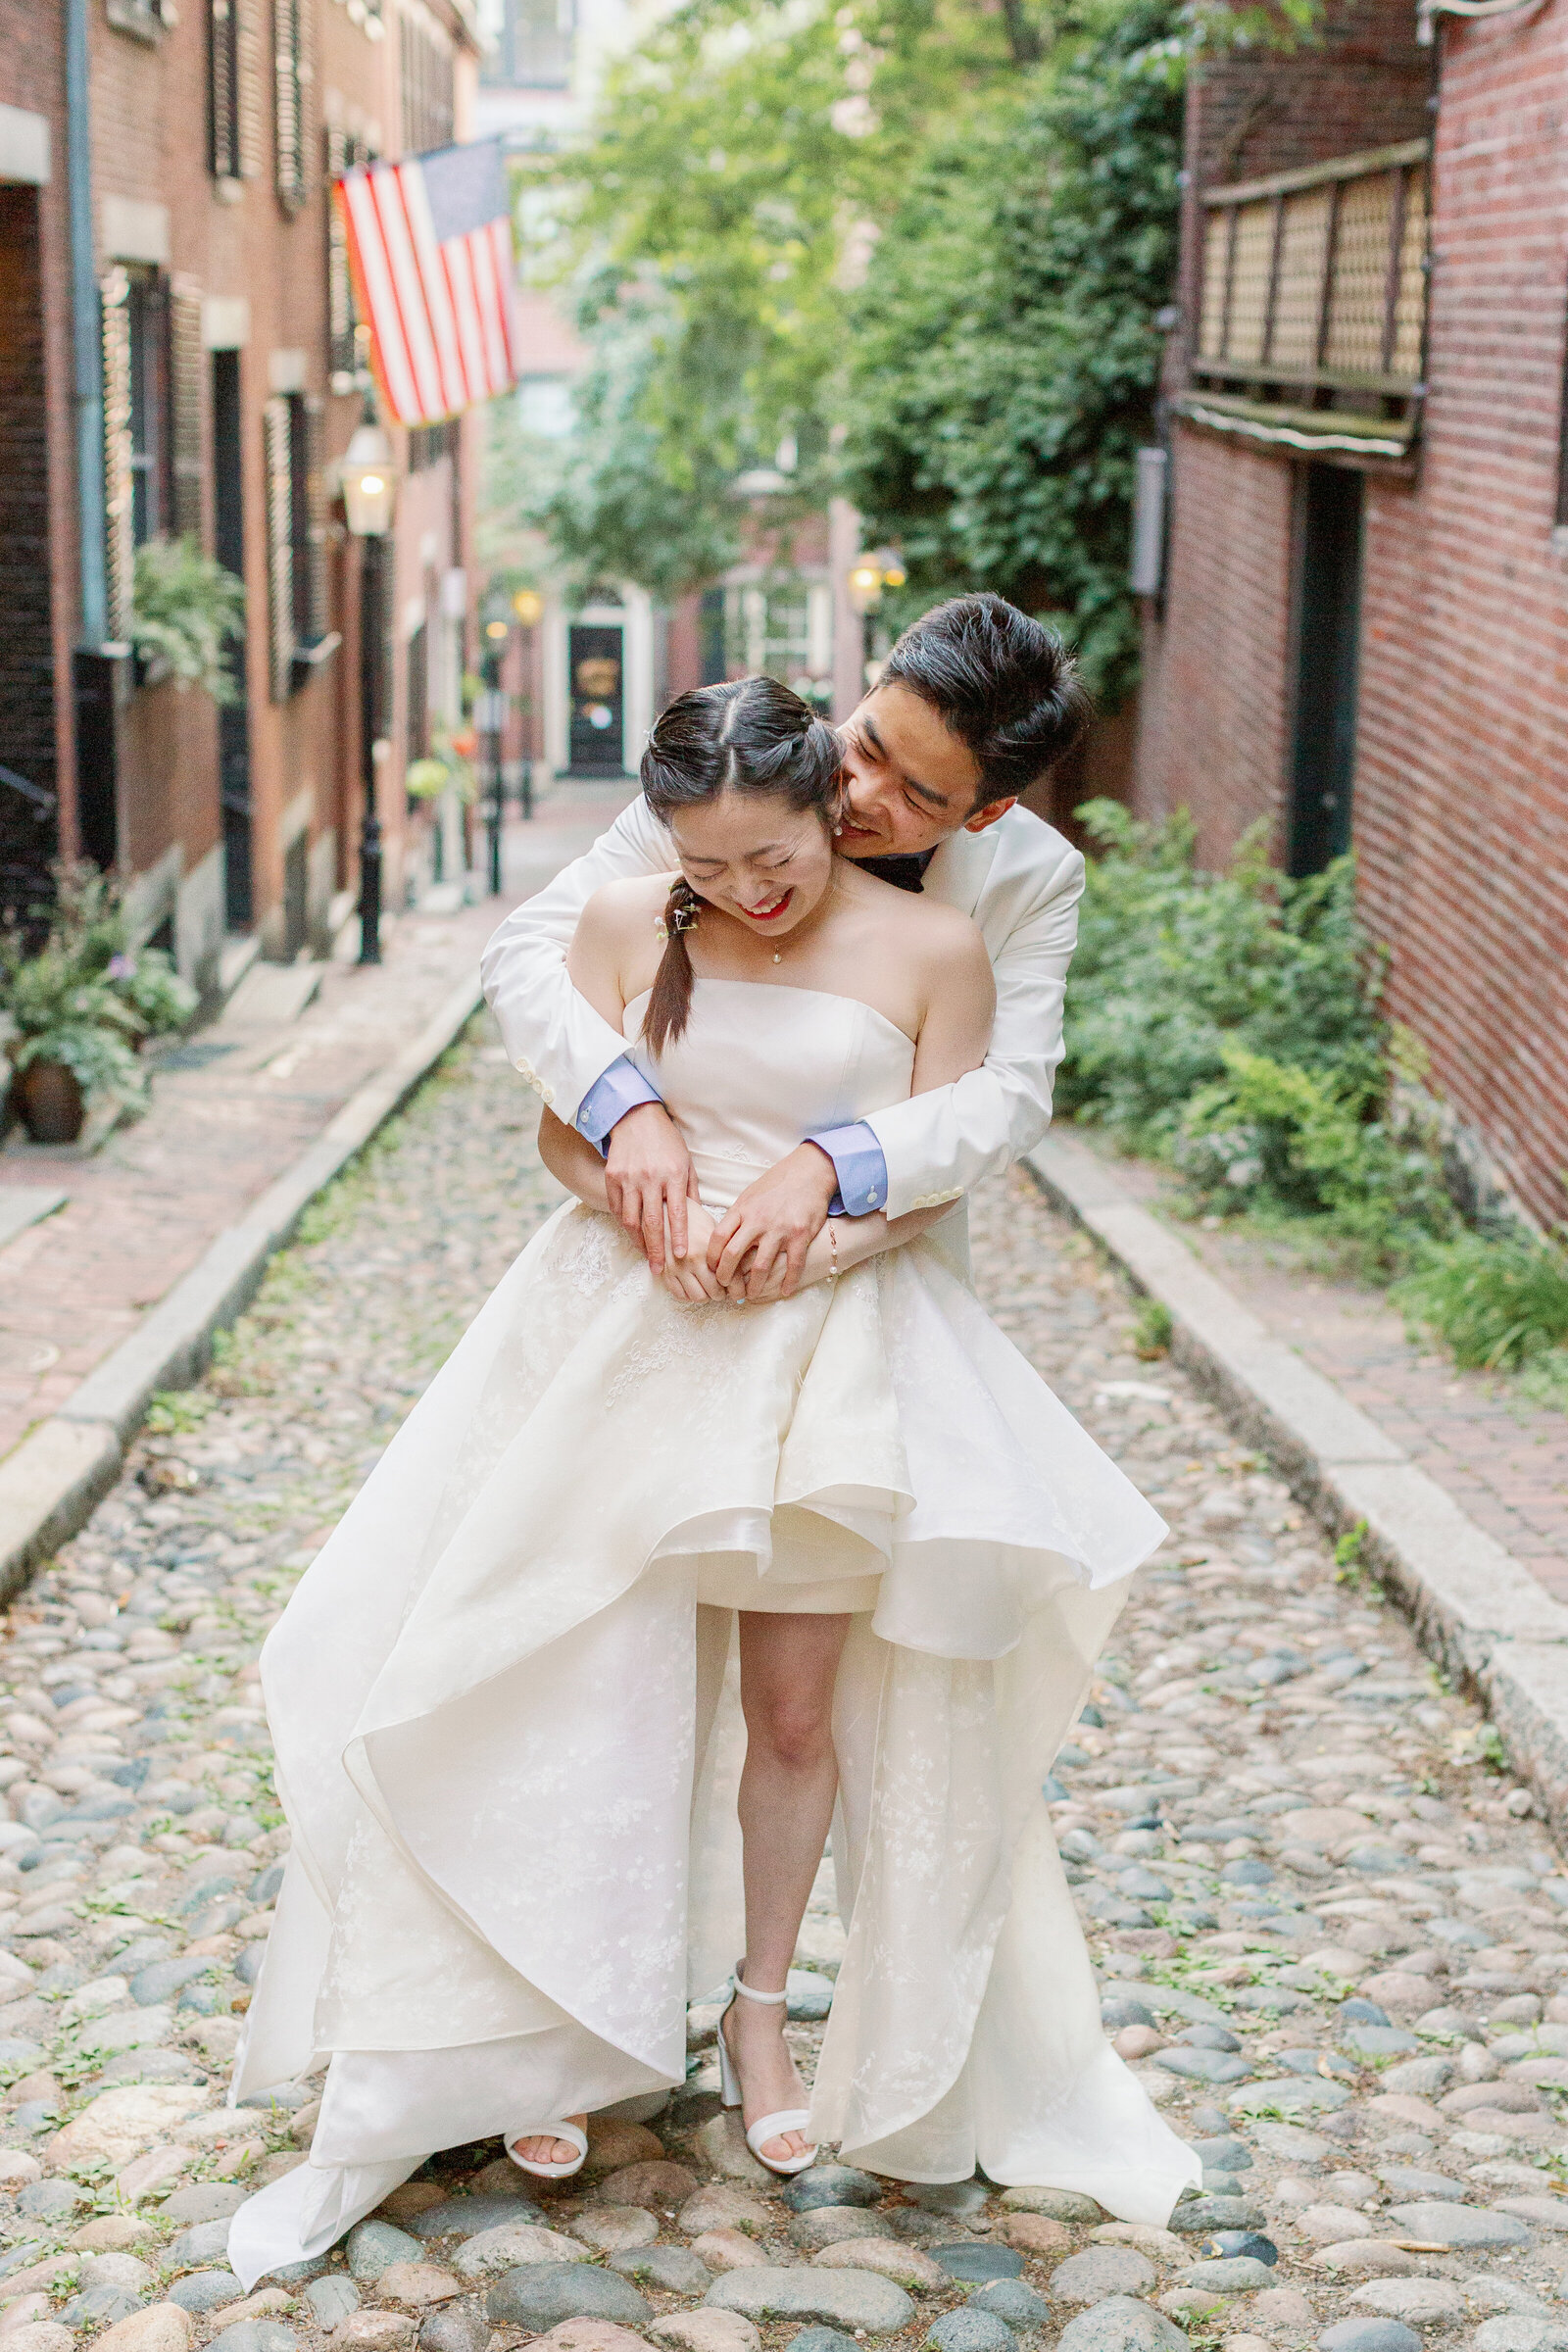 A groom hugging their bride from behind while standing on a small cobblestone road.